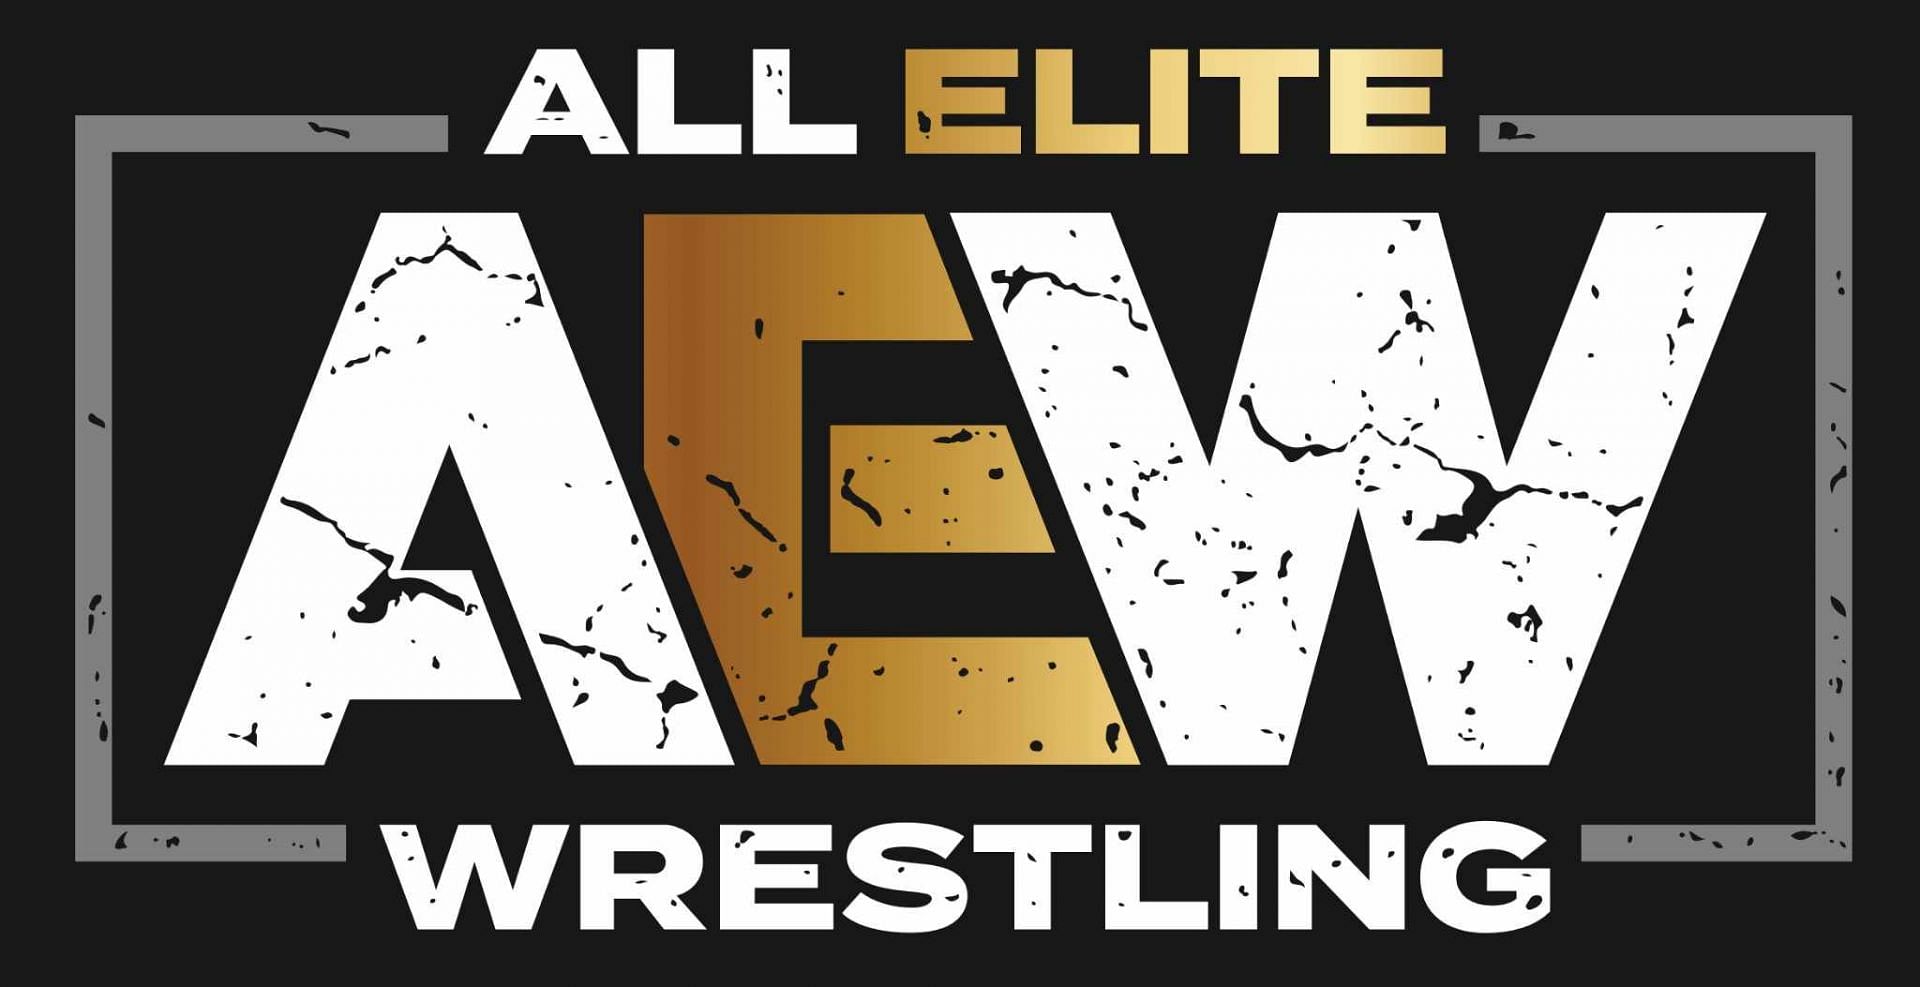 Tony Khan is the CEO and president of AEW.